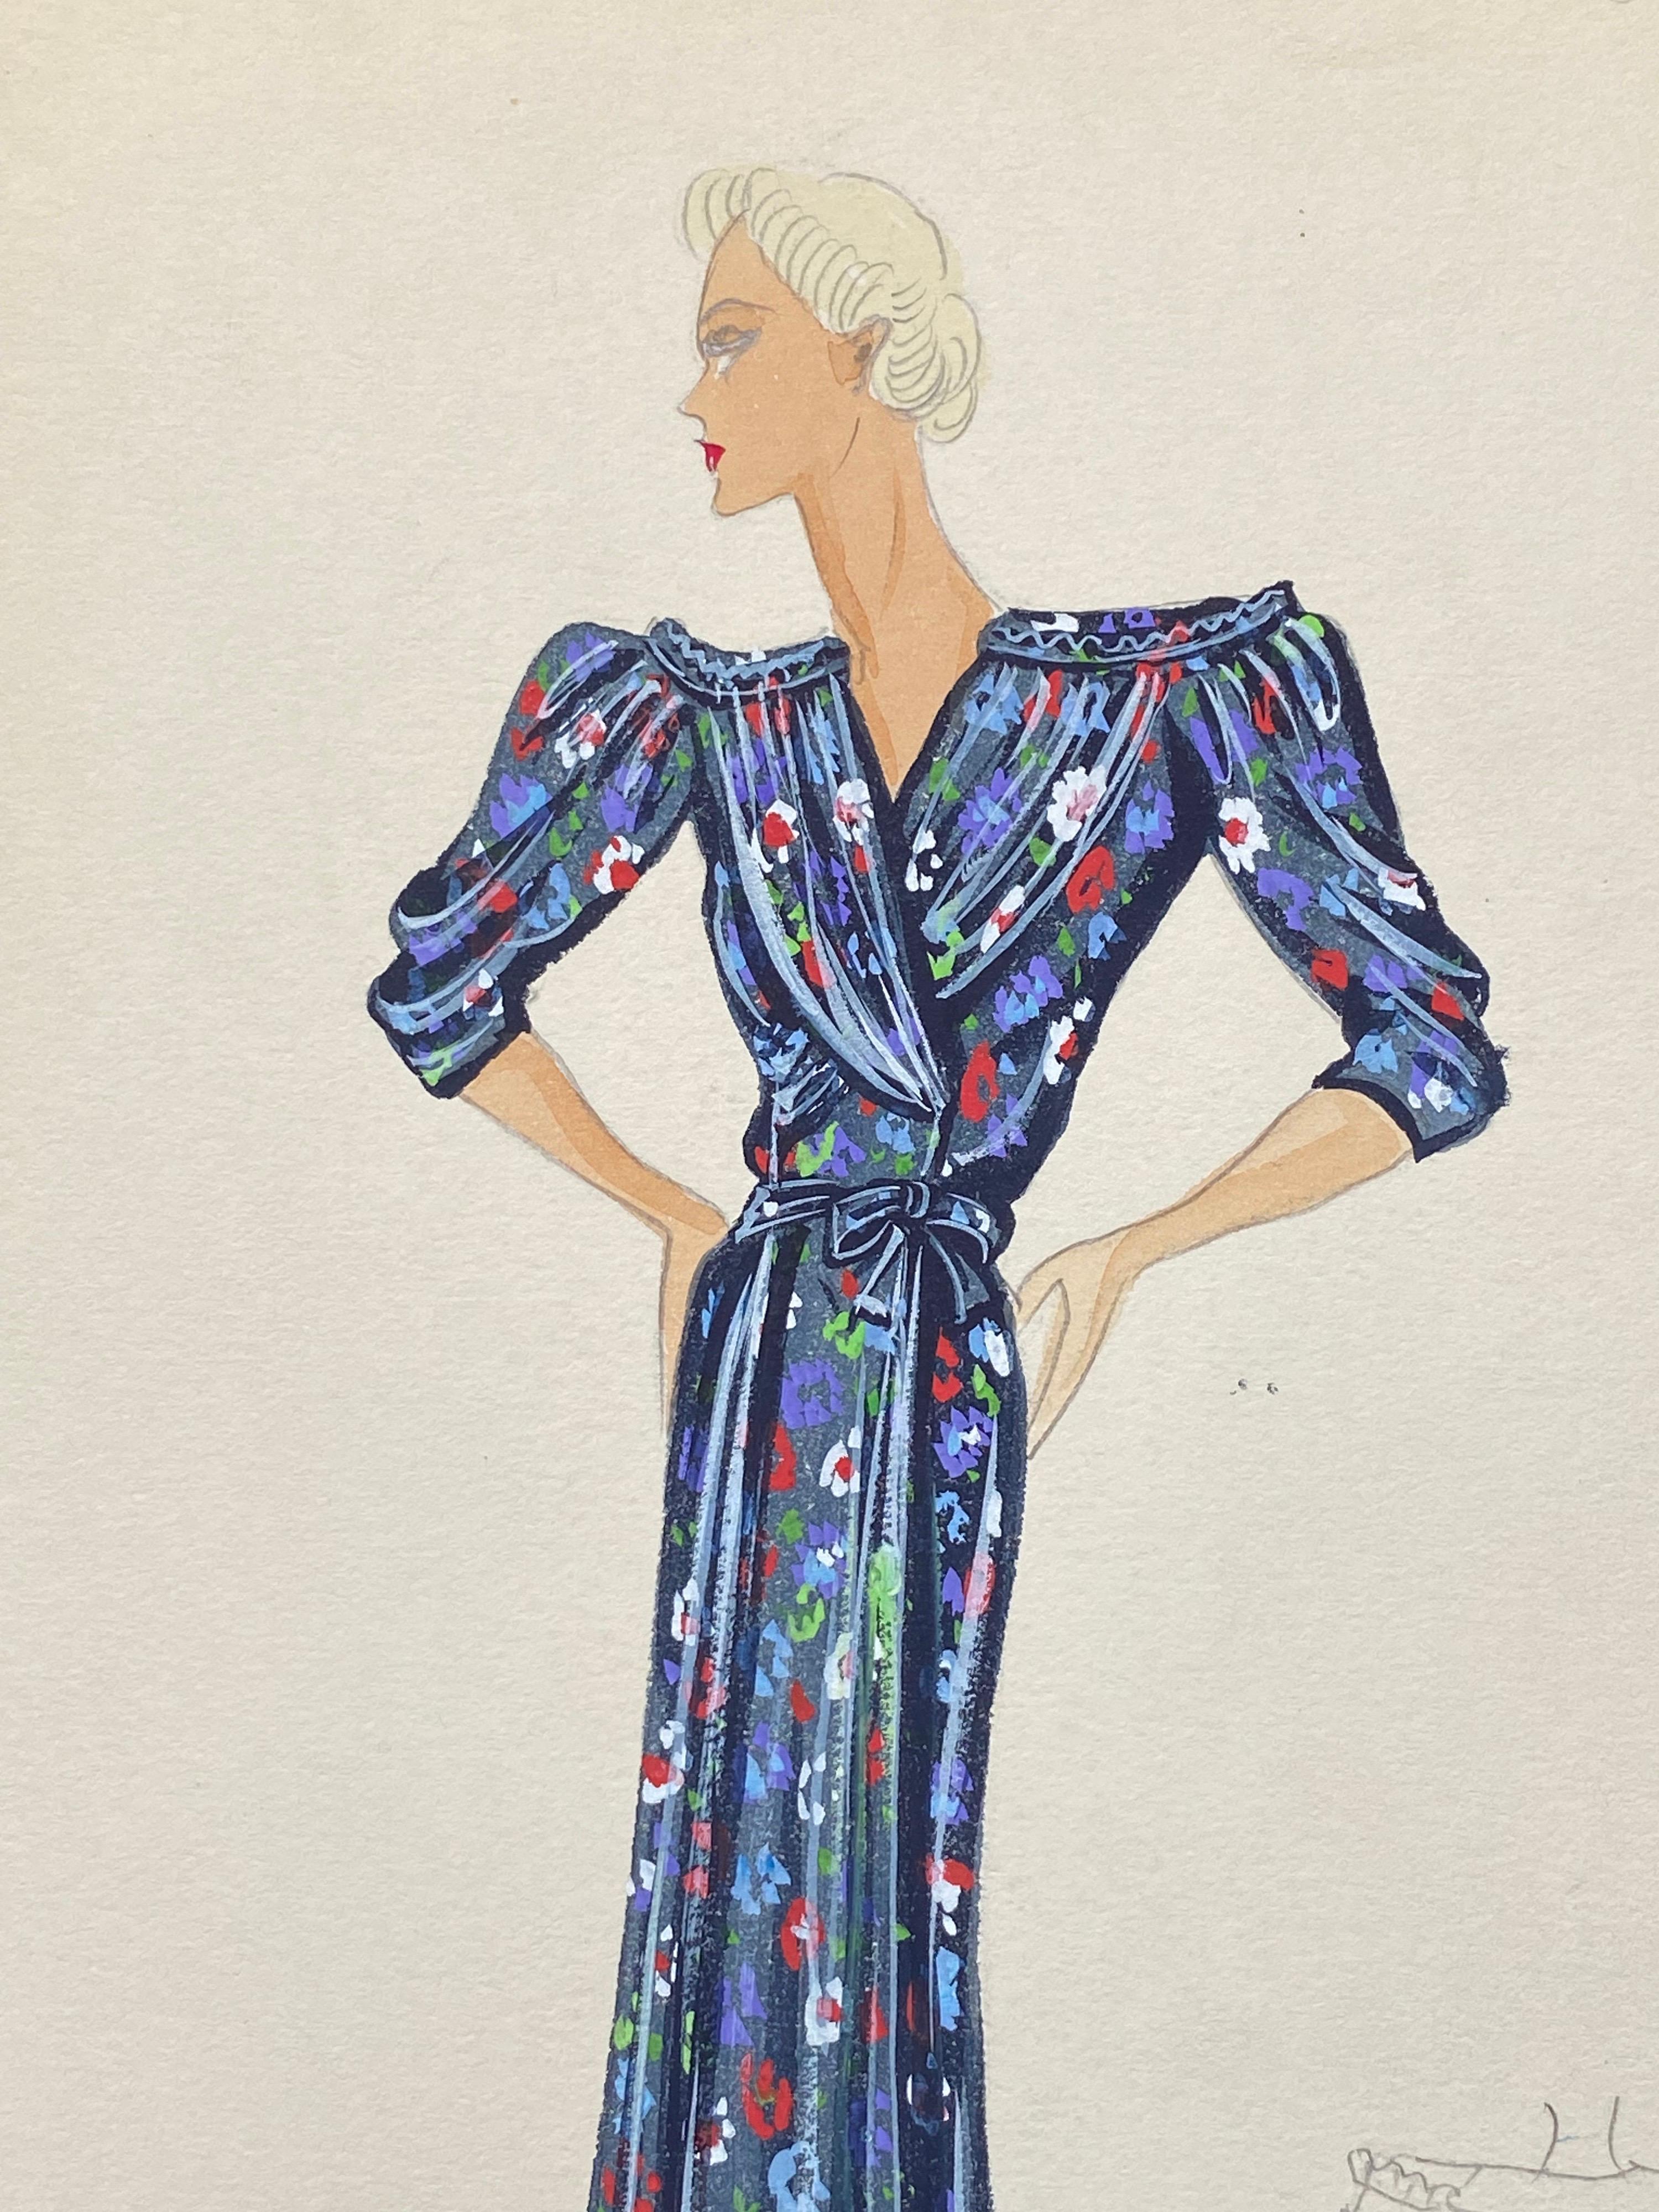 Very stylish, unique and original 1930's French fashion design, no doubt of Parisian origin. 

The painting, executed in gouache/ watercolor and pencil, is dated to the upper corner as well as titled. 

The painting will make wonderful interior